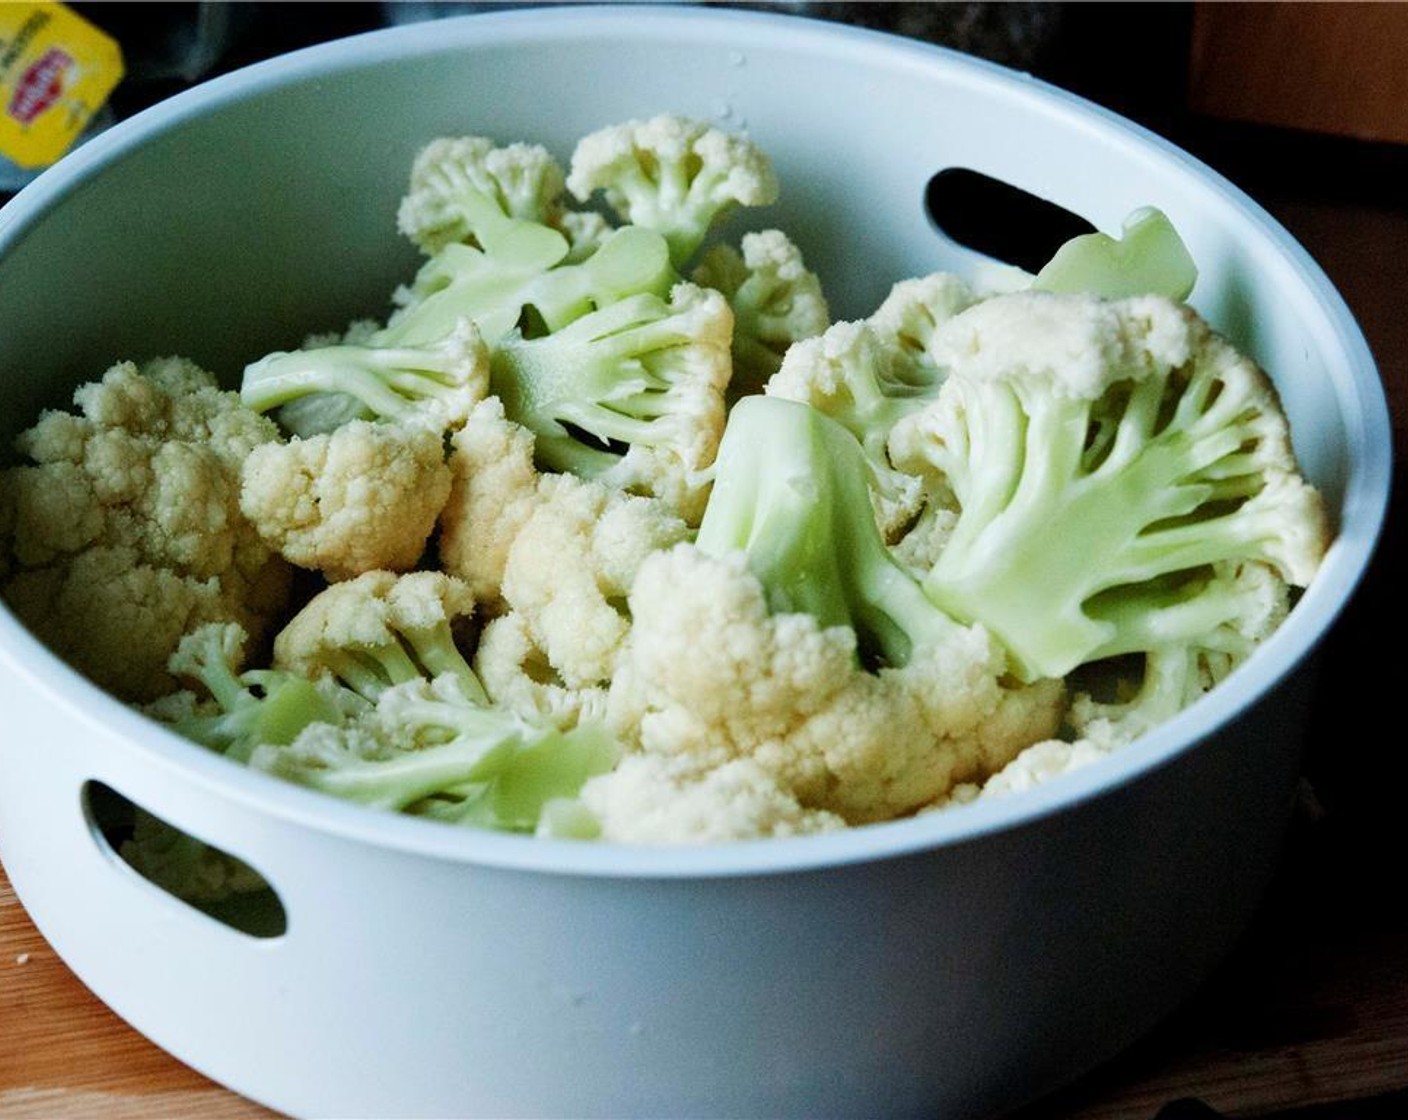 step 1 Cut off the florets on the Cauliflower (2 cups) and steam it for 20 minutes.